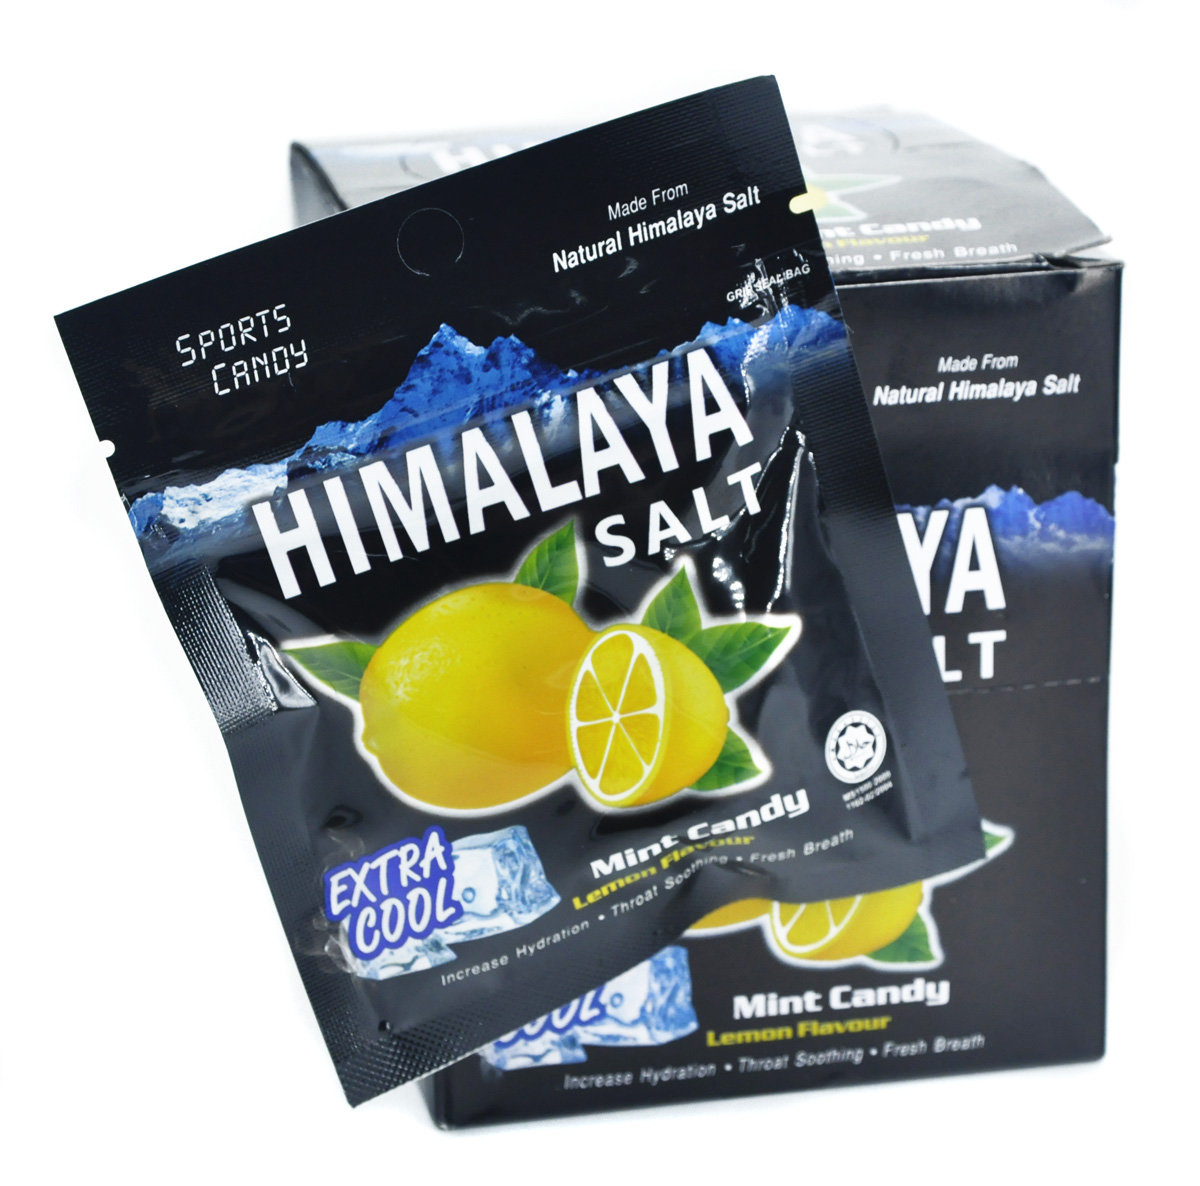 HIMALAYA SALT MINT CANDY - LEMON EXTRA COOL 15g X 12 Packets CONFECTIONERY  Malaysia, Johor Supplier, Distributor, Importer, Supply